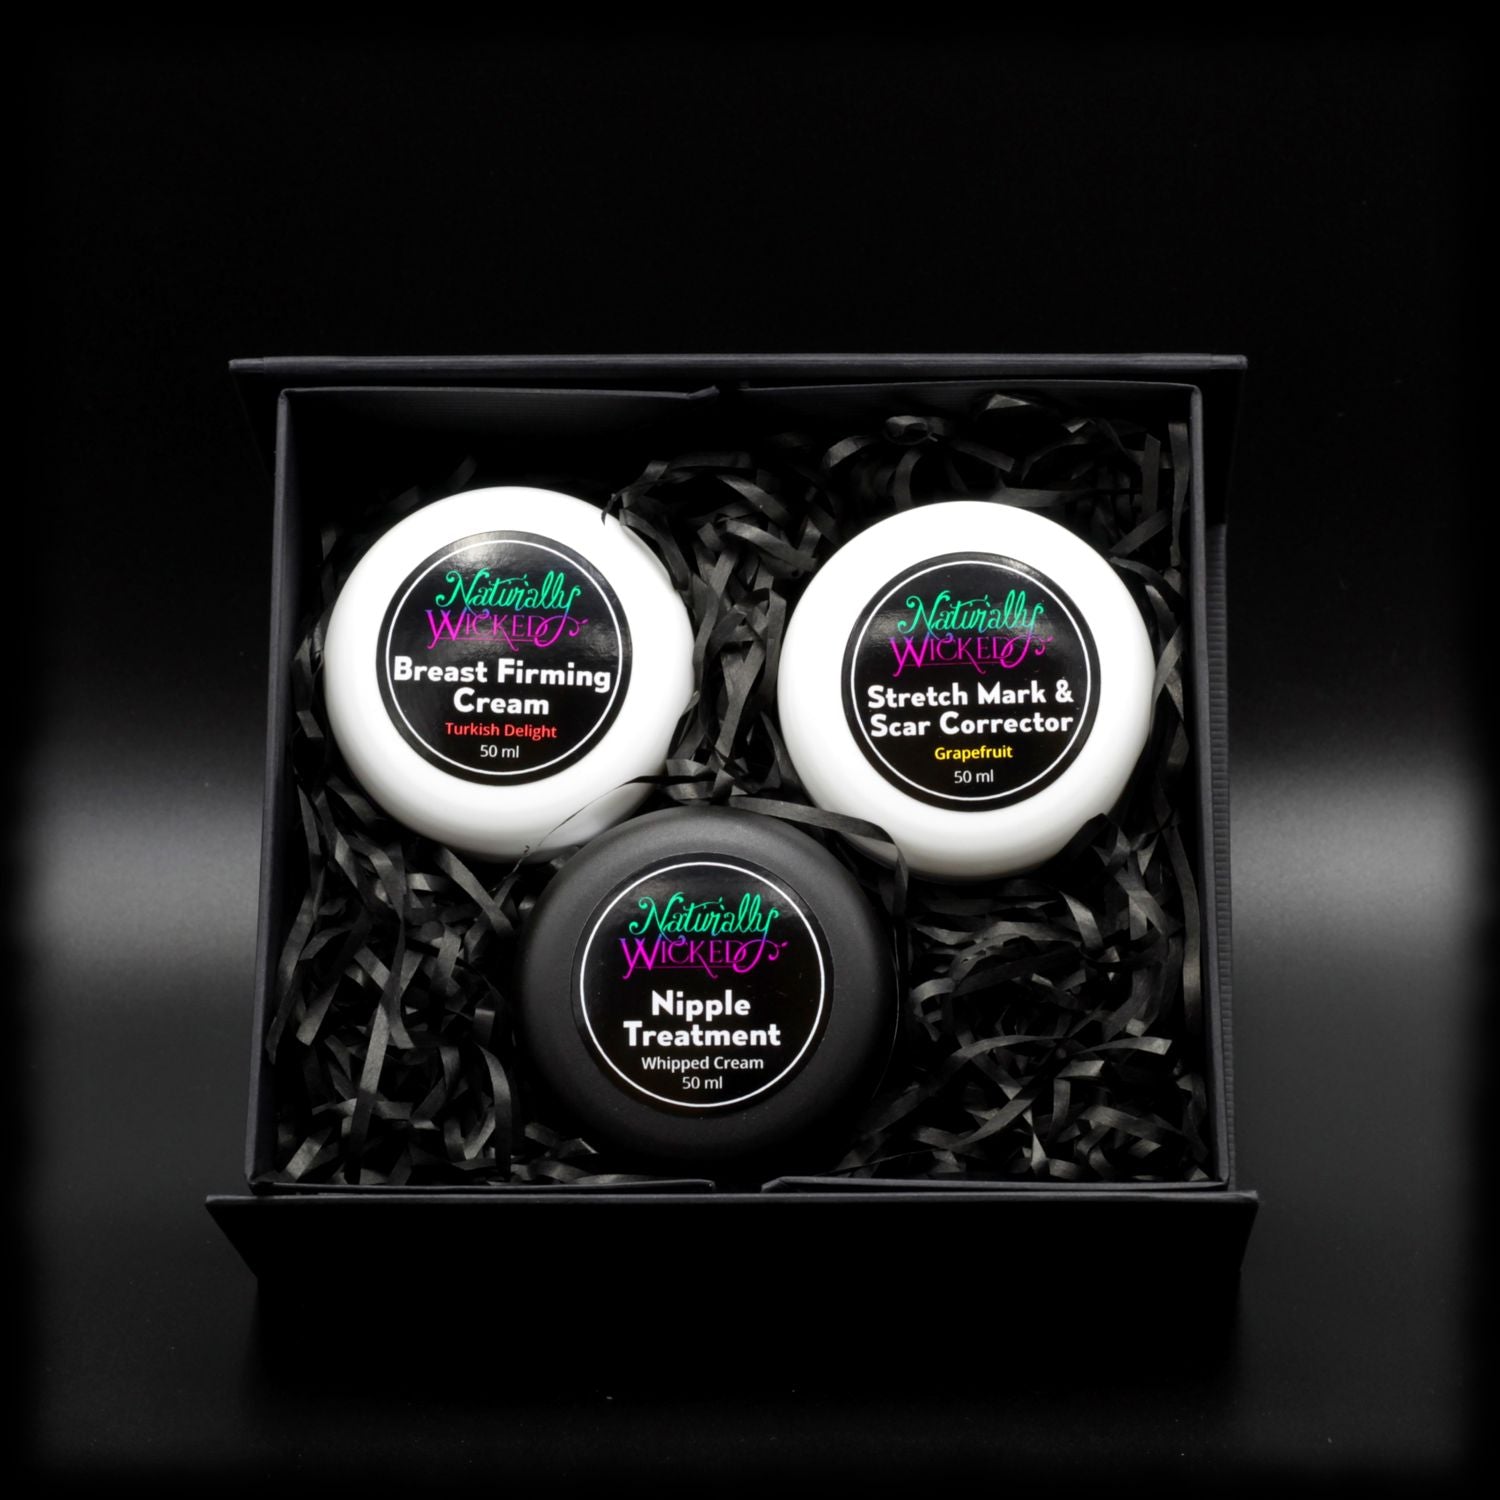 Inside View Of Naturally Wicked 3 Step Mamma Kit. Featuring Naturally Wicked Turkish Delight Breast Firming Cream, Naturally Wicked Whipped Cream Nipple Treatment & Naturally Wicked Grapefruit Stretch Mark & Scar Corrector